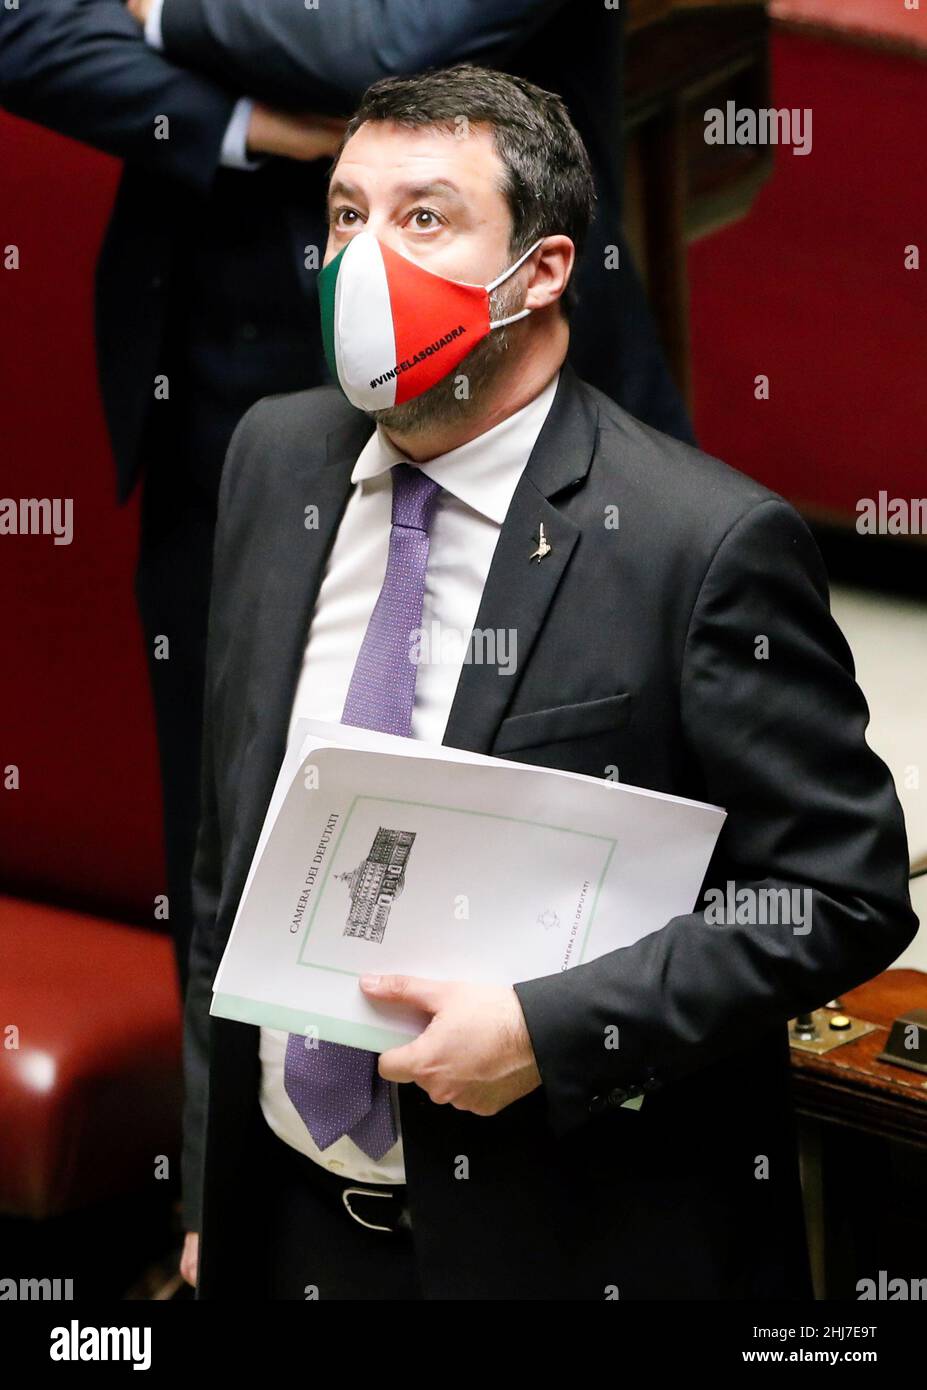 League party leader Matteo Salvini attends a voting session to elect  Italy's new president, at the Chamber of Deputies in Rome, Italy, January  27, 2022. REUTERS/Remo Casilli/Pool Stock Photo - Alamy